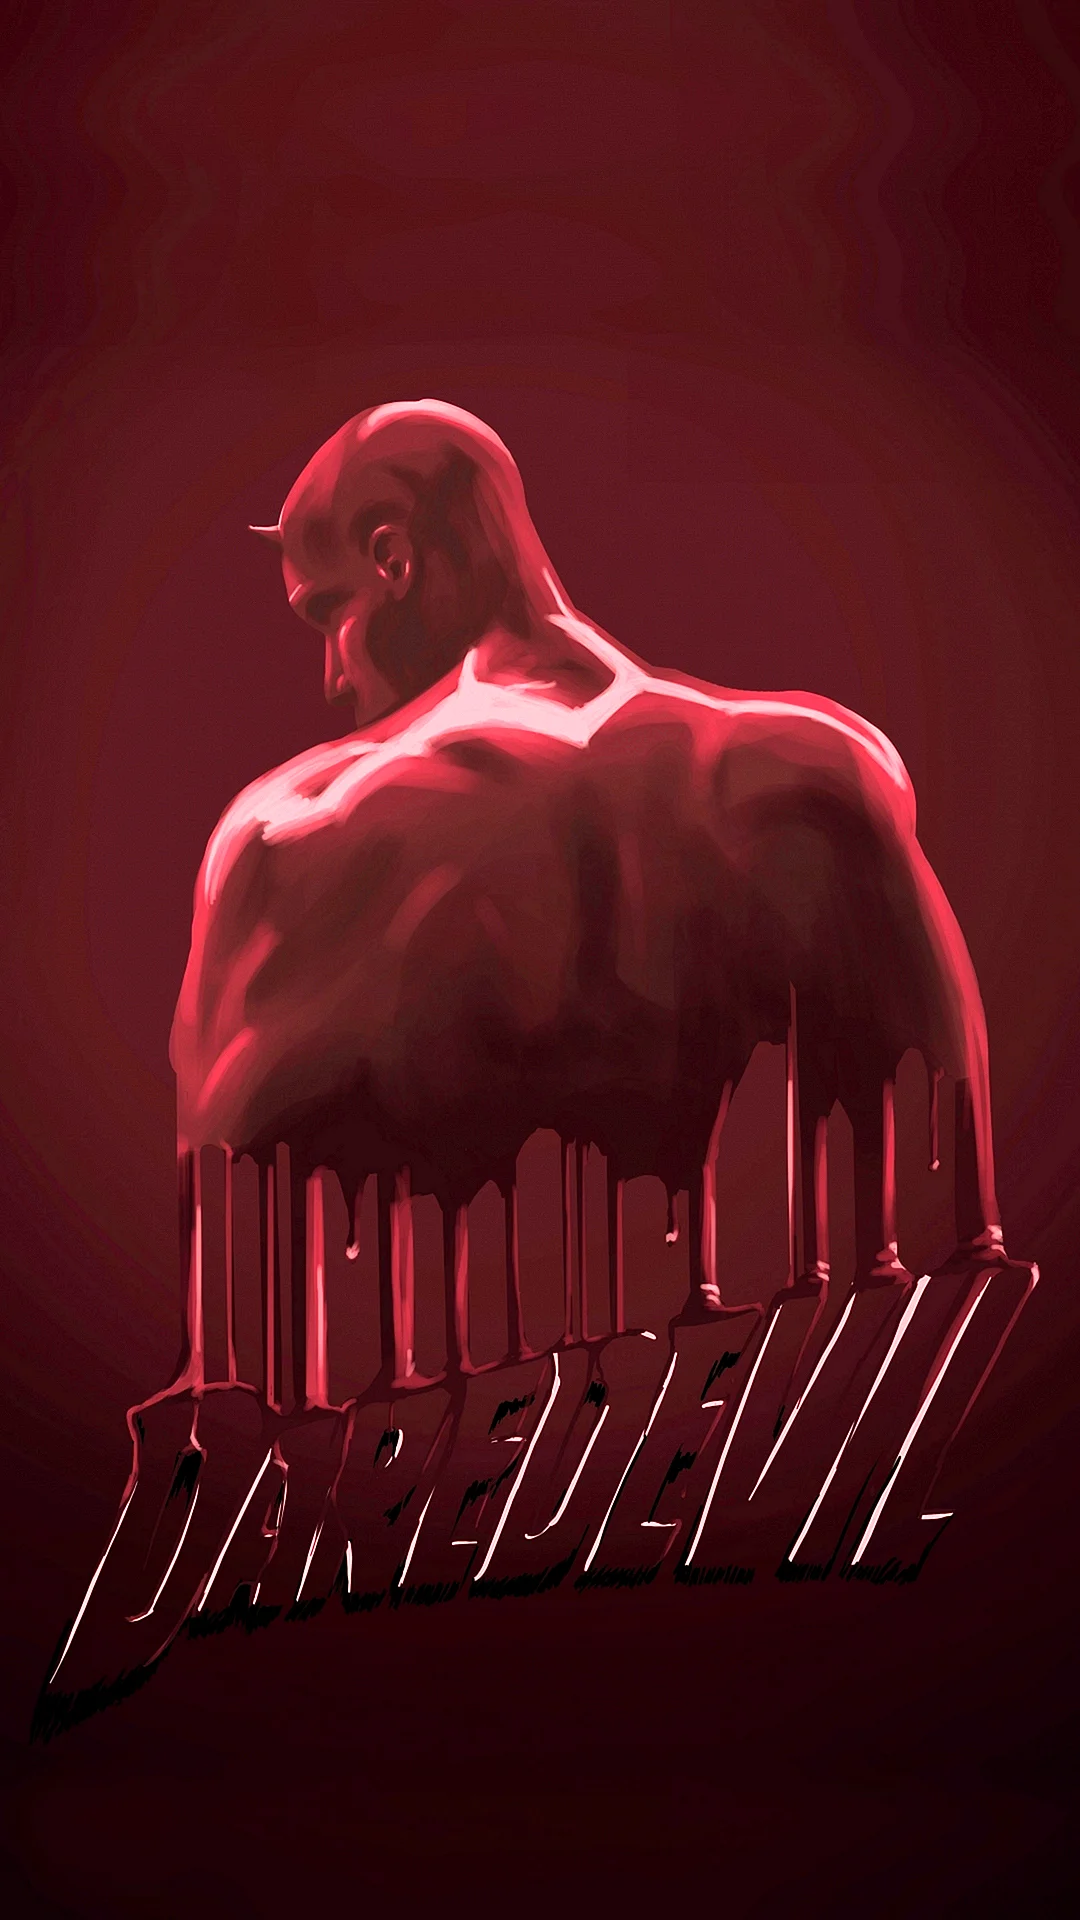 Daredevil Knuckles Wallpaper For iPhone